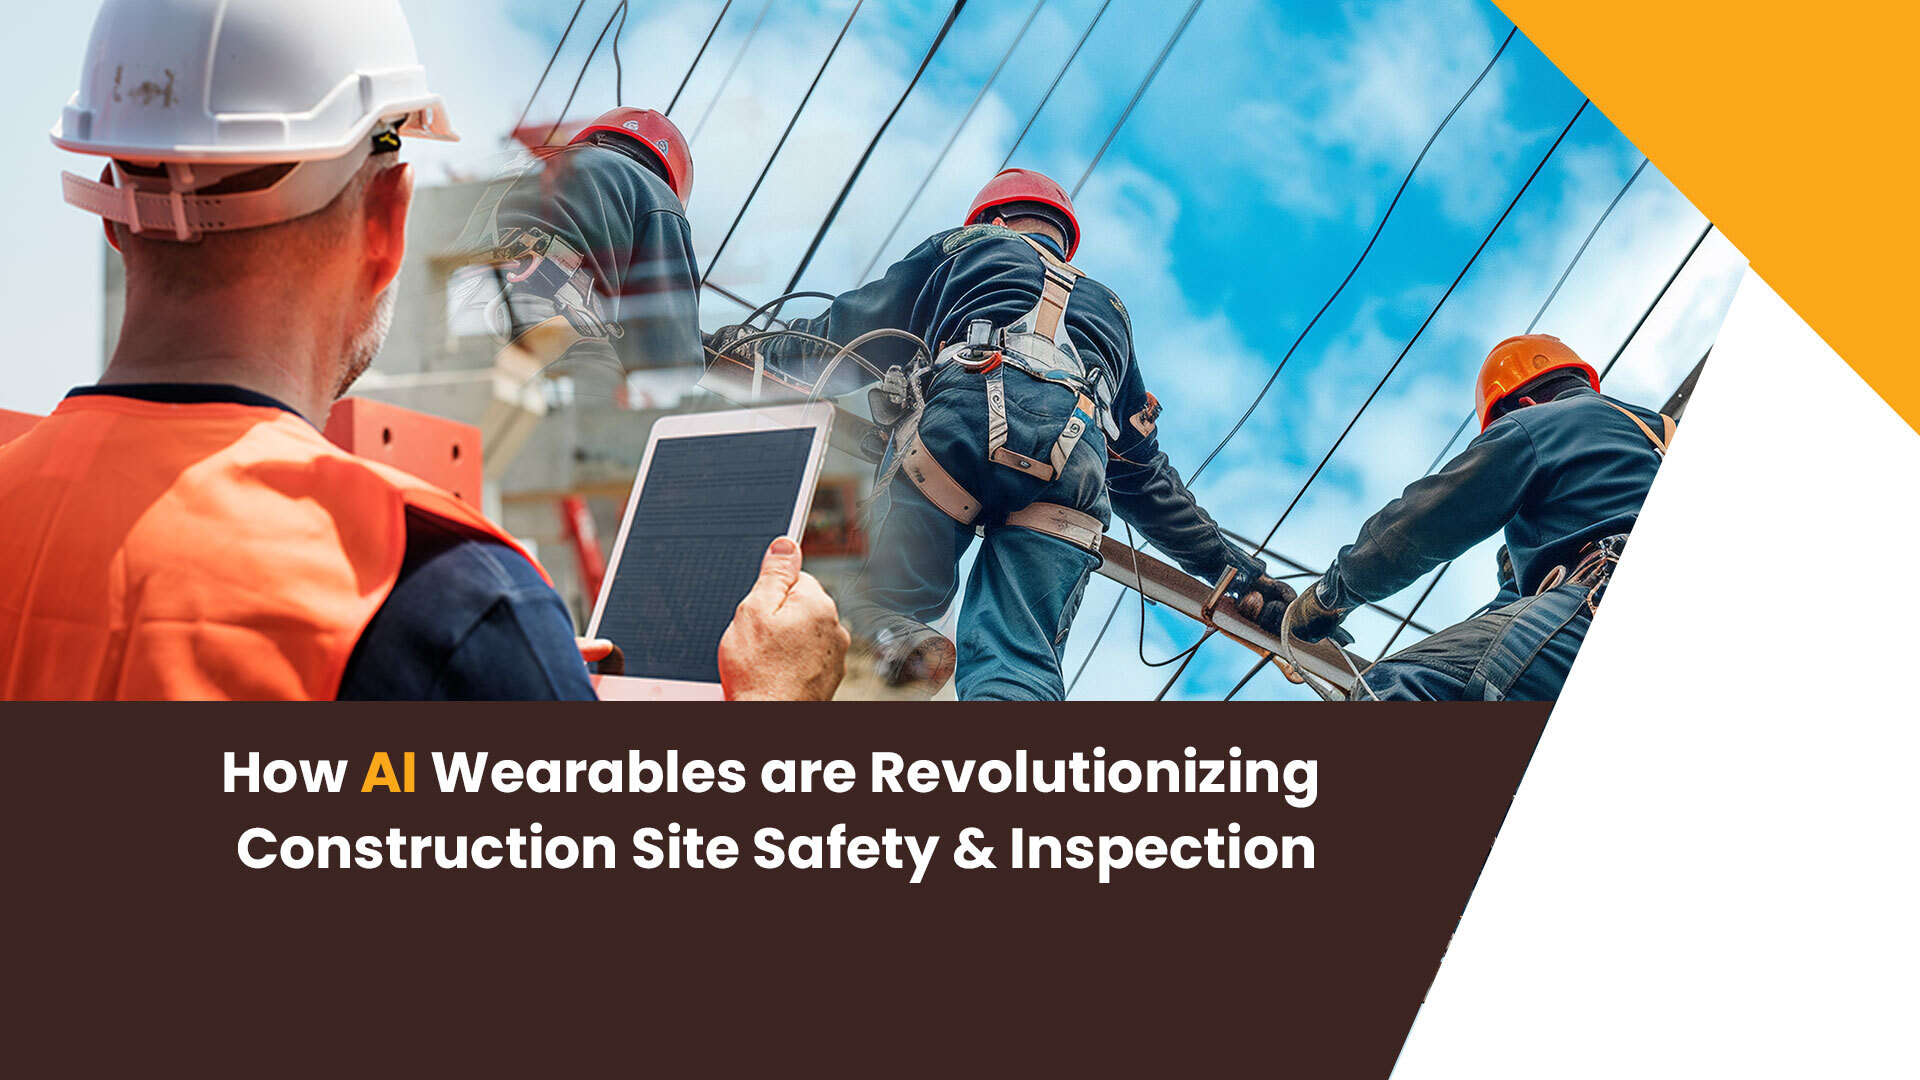 Construction Site Safety & Inspection